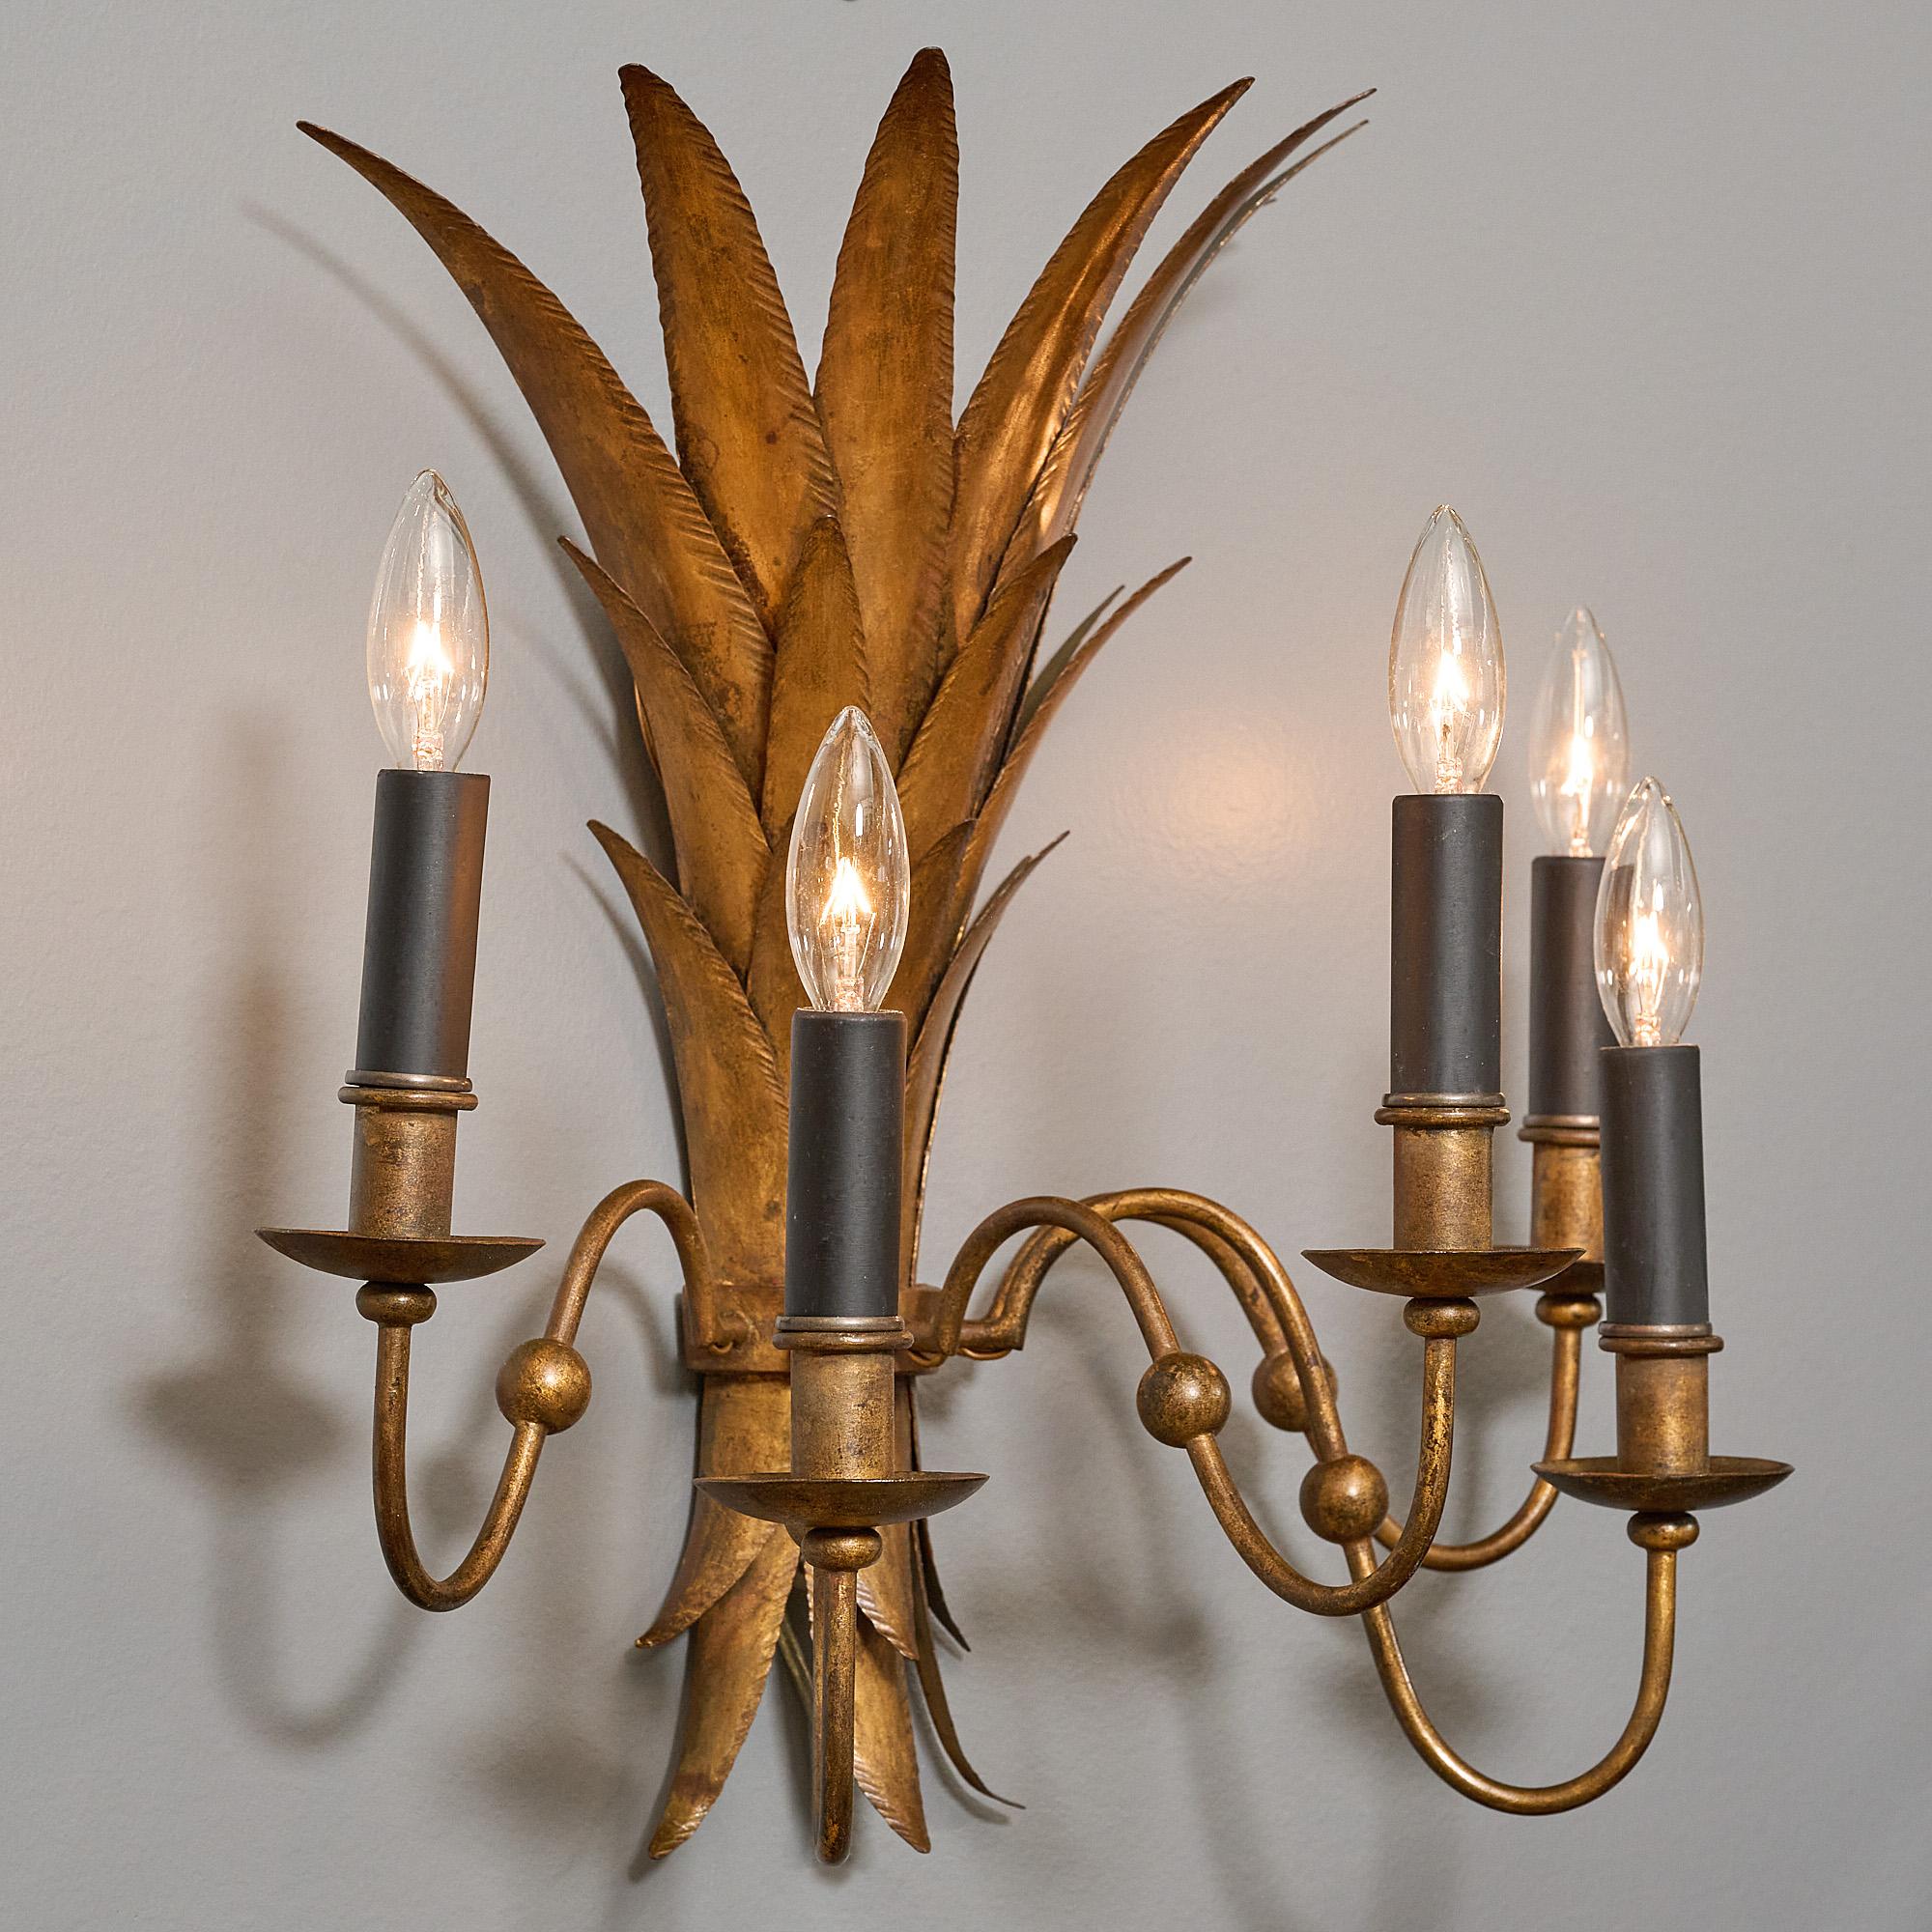 Sheaf of Wheat Sconces In Good Condition For Sale In Austin, TX